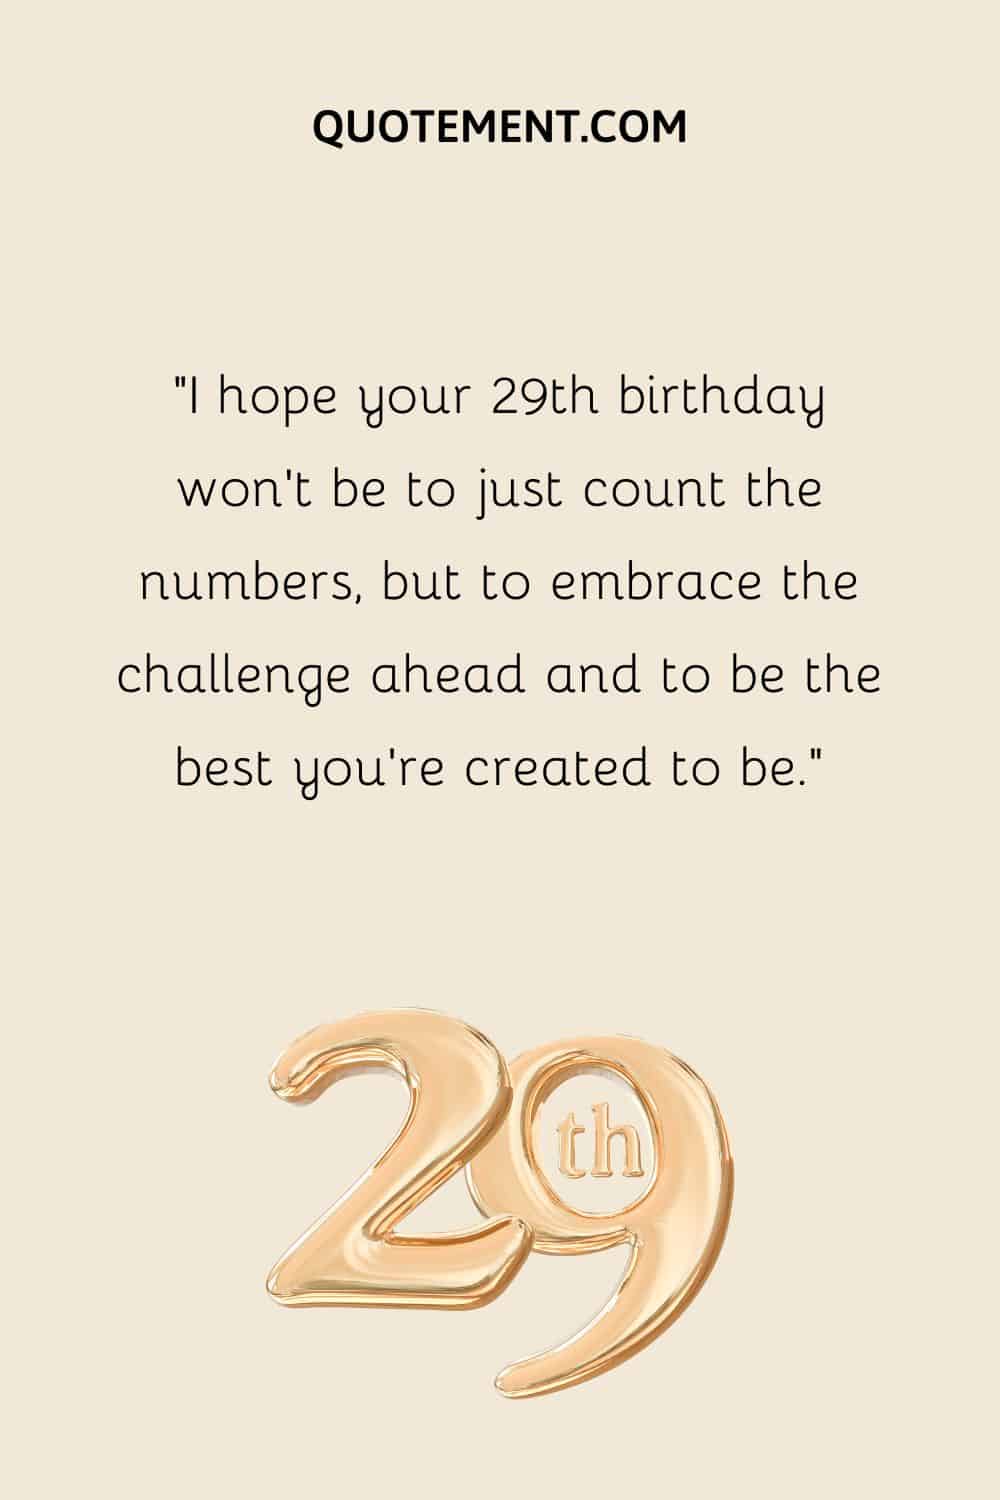 I hope your 29th birthday won’t be to just count the numbers